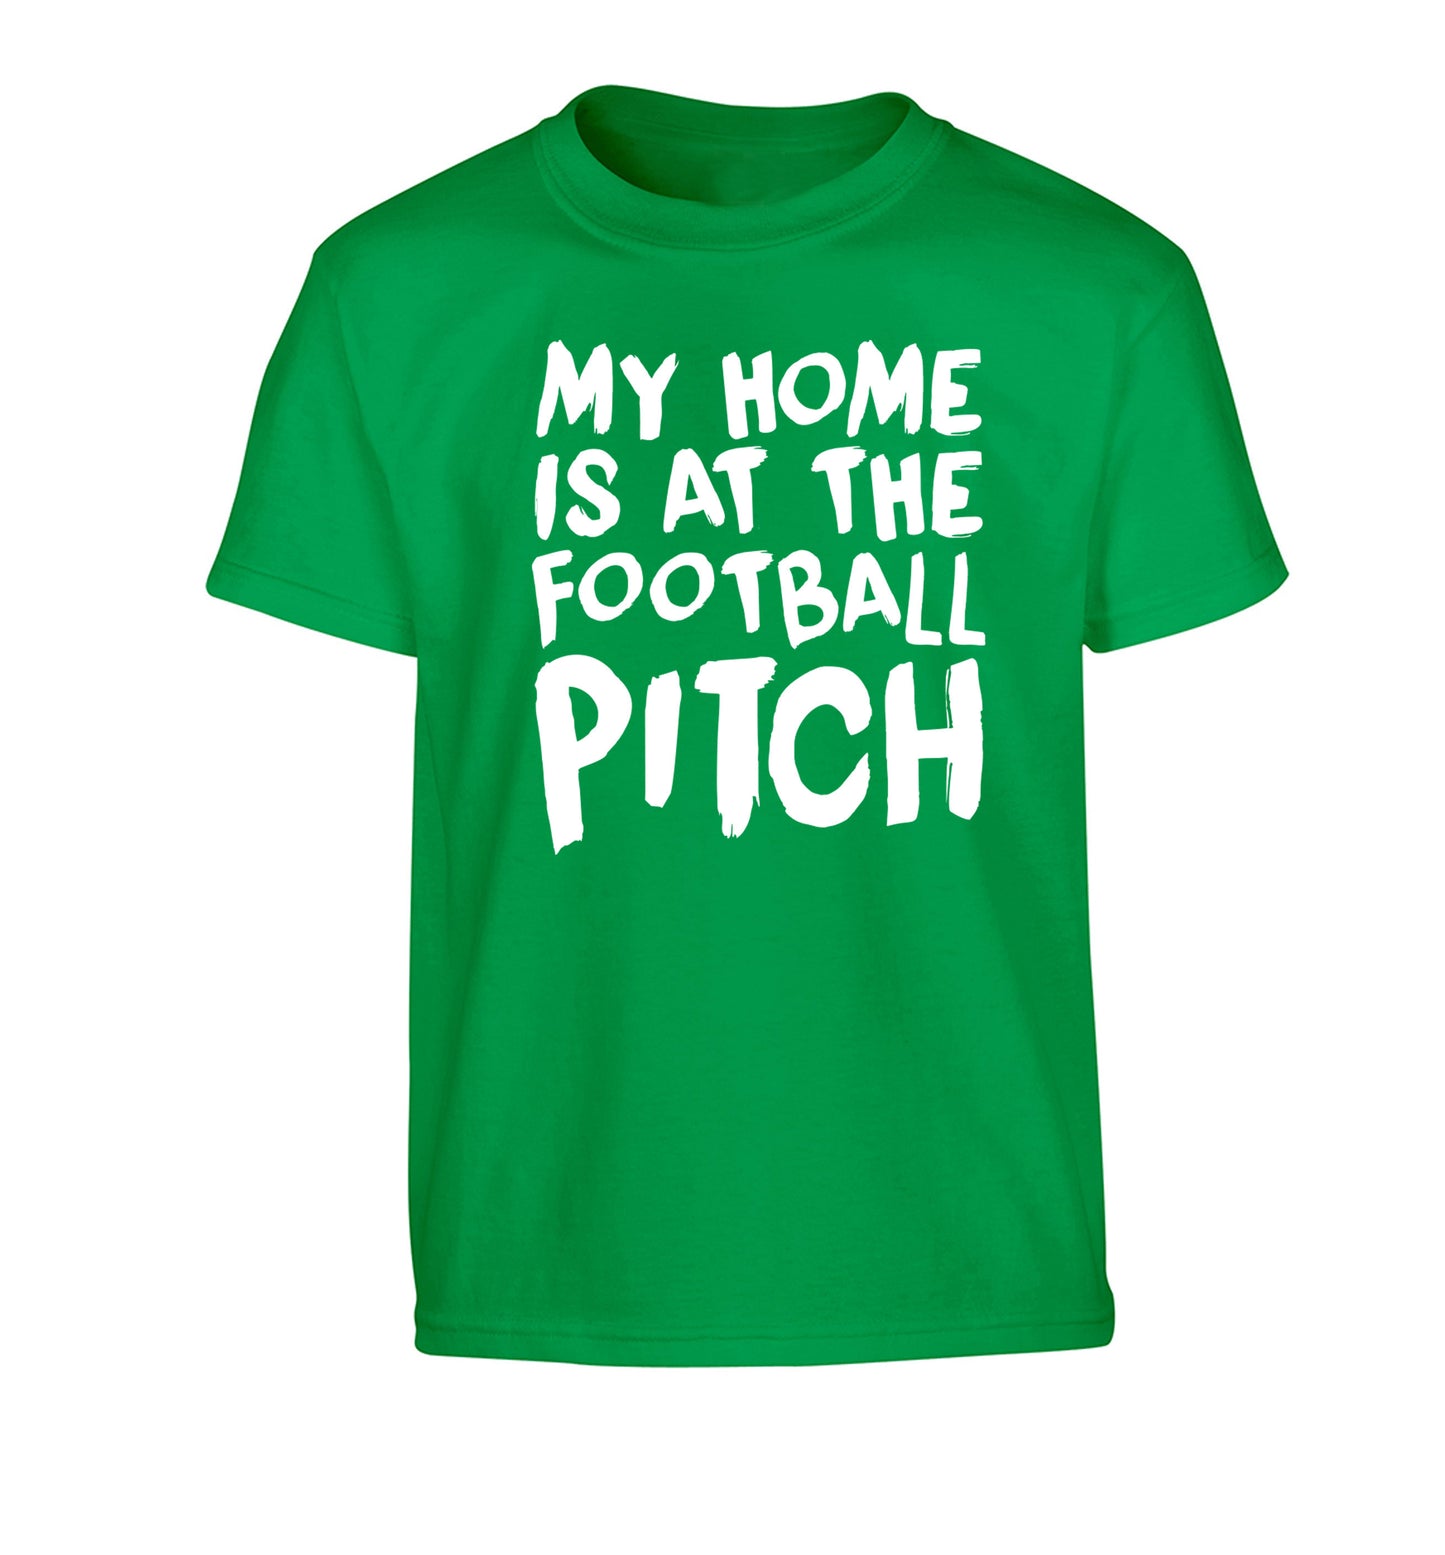 My home is at the football pitch Children's green Tshirt 12-14 Years